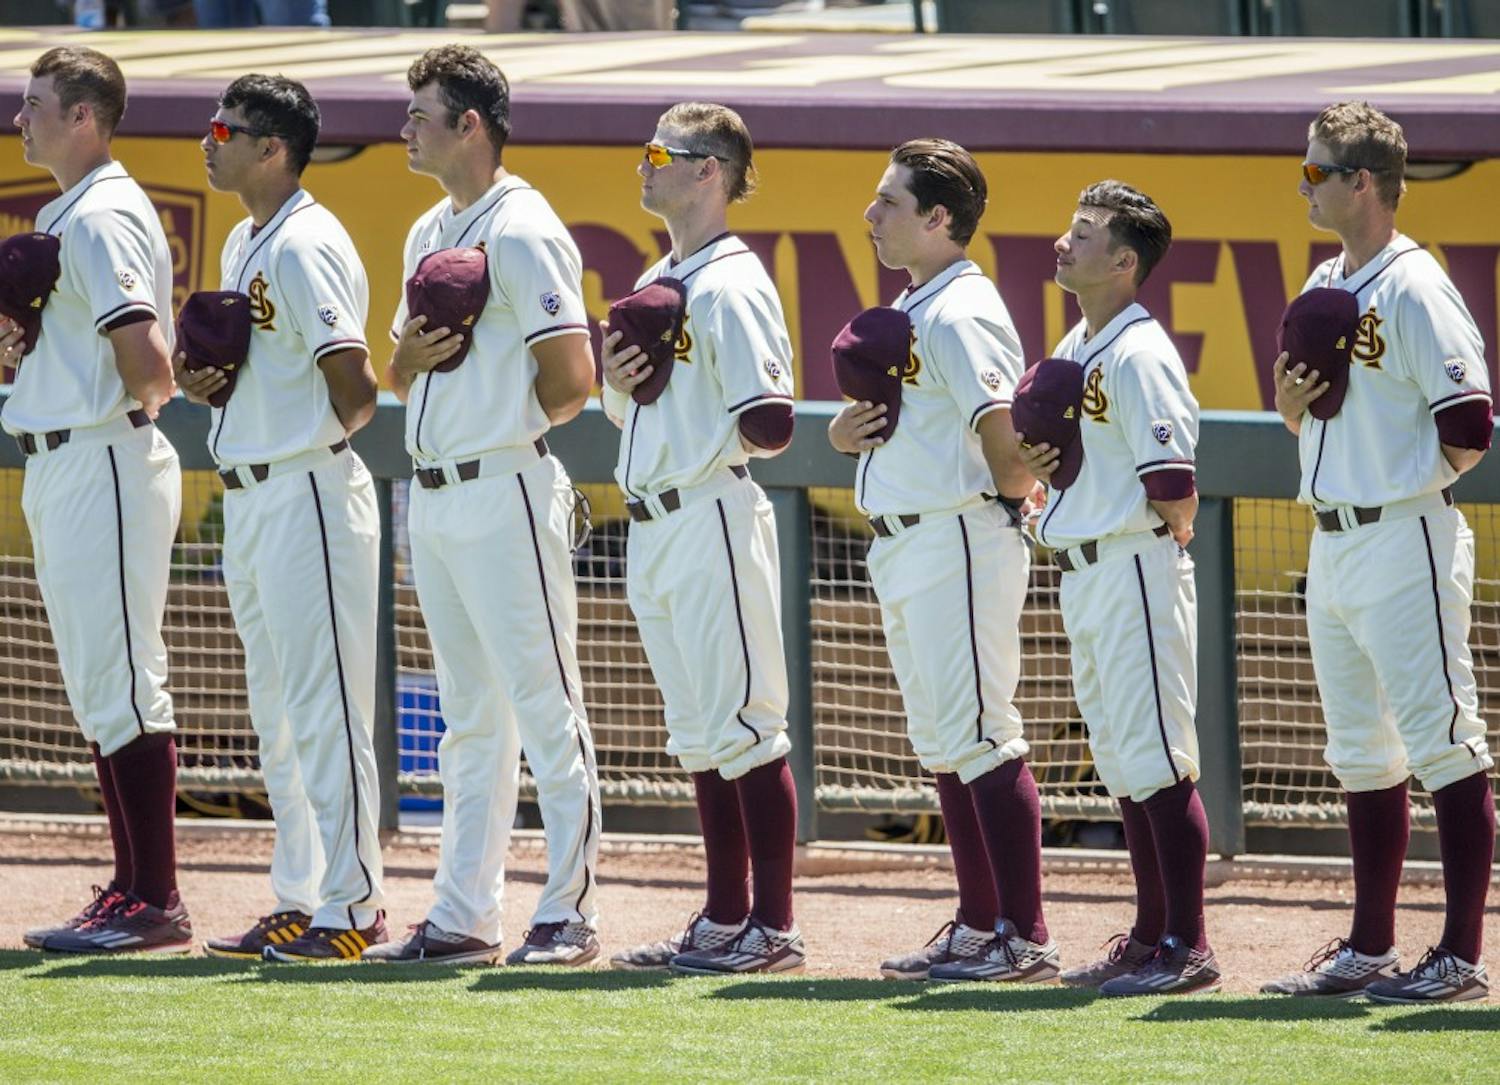 ASU baseball players remove their hats for the National Anthem before a game against California at Phoenix Municipal Stadium in Phoenix, Arizona, on Sunday, April 17, 2016. The Sun Devils won the final game in this series 4-0.